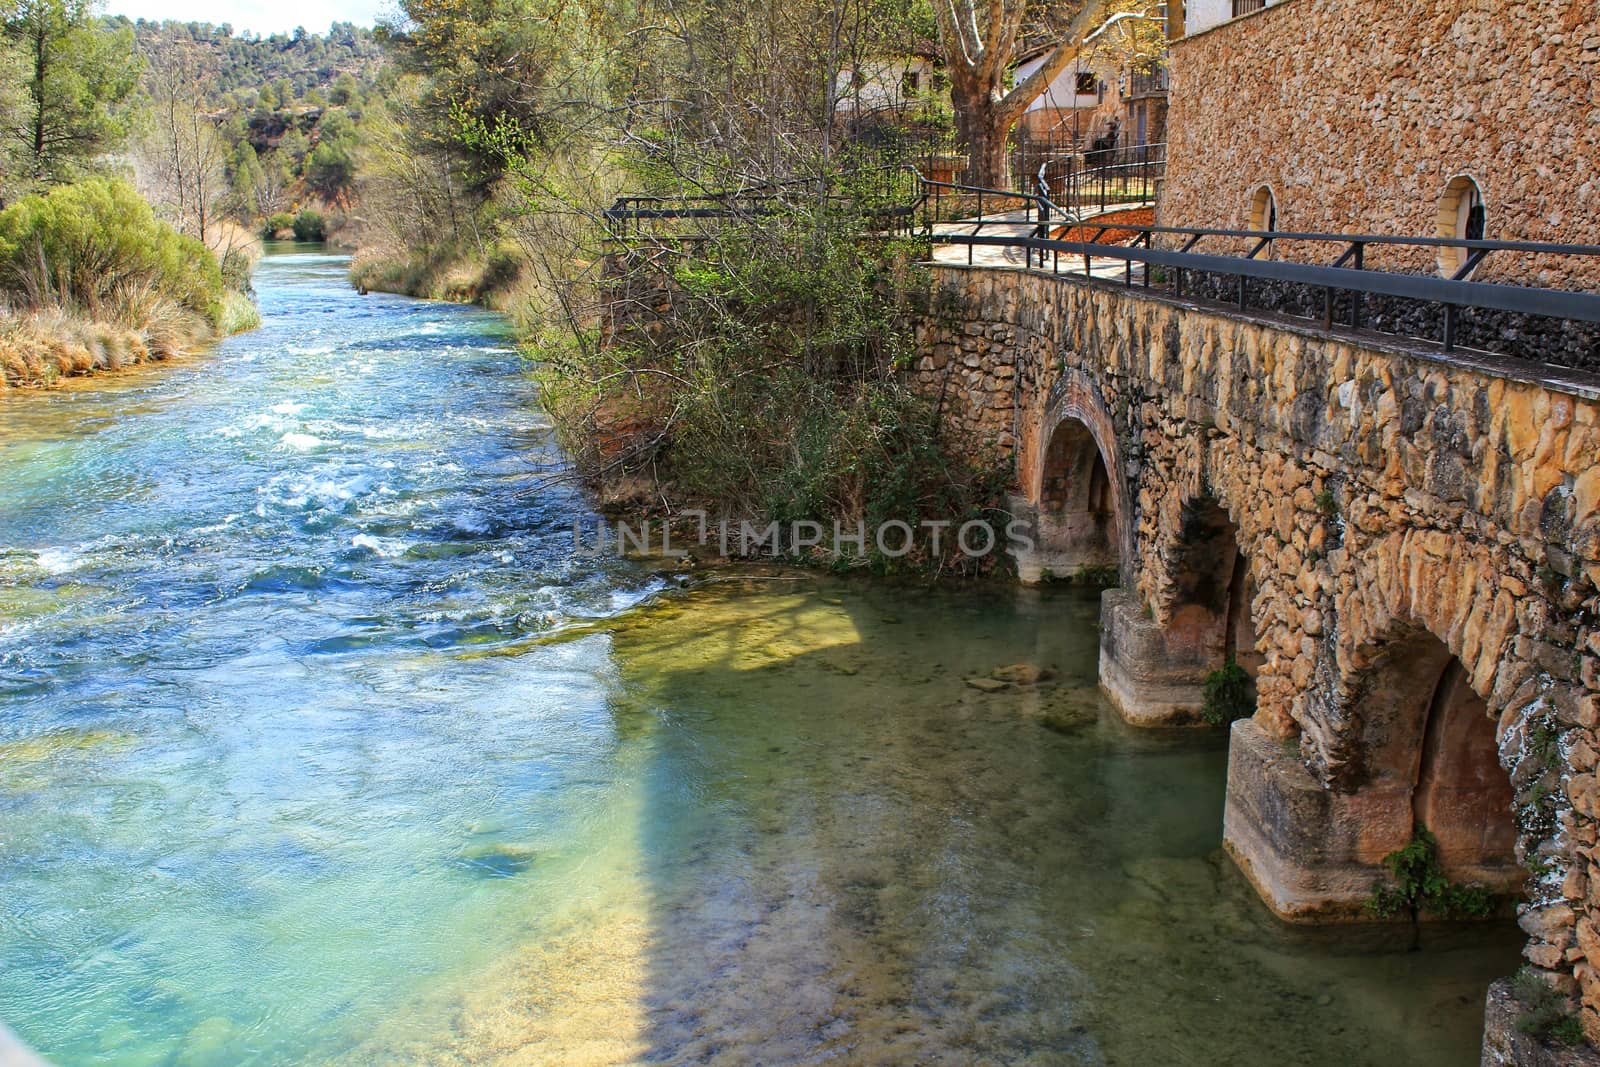 Cabriel River with crystal clear waters and surrounded by green vegetation by soniabonet